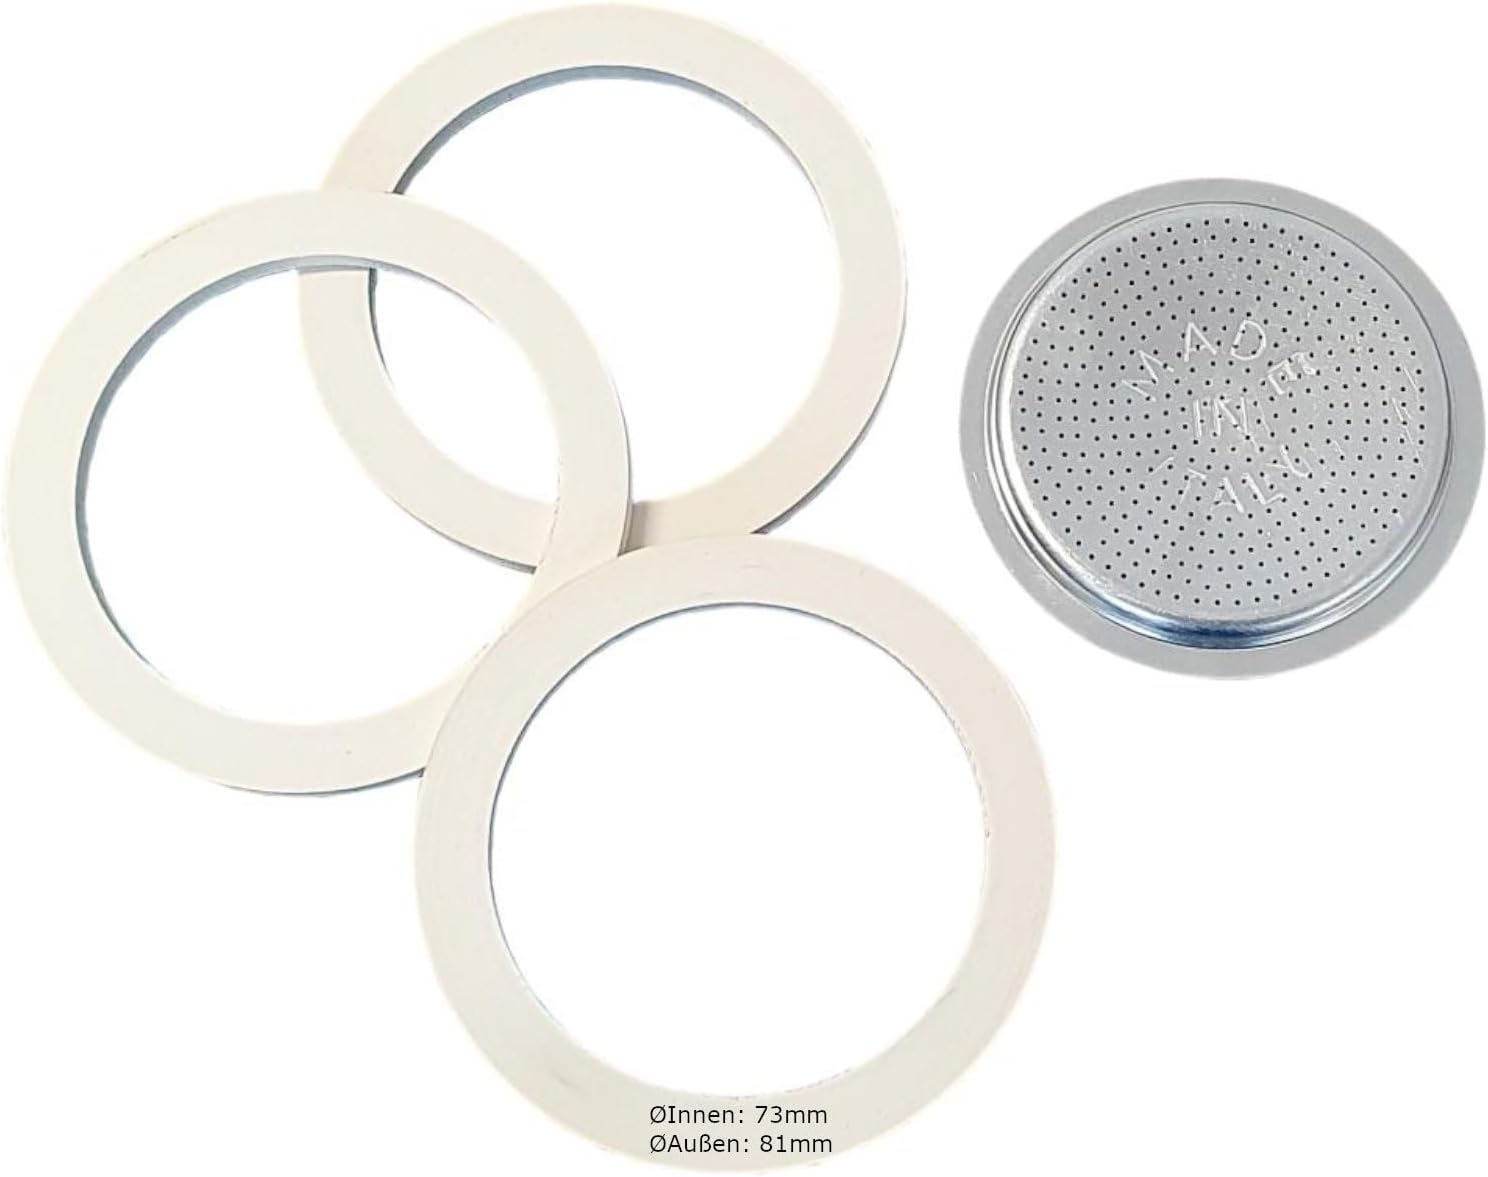 Harren24 3 Sealing Rings + Filter Strainer for Bialetti (Moka Express, 81 mm / 9 Cups)